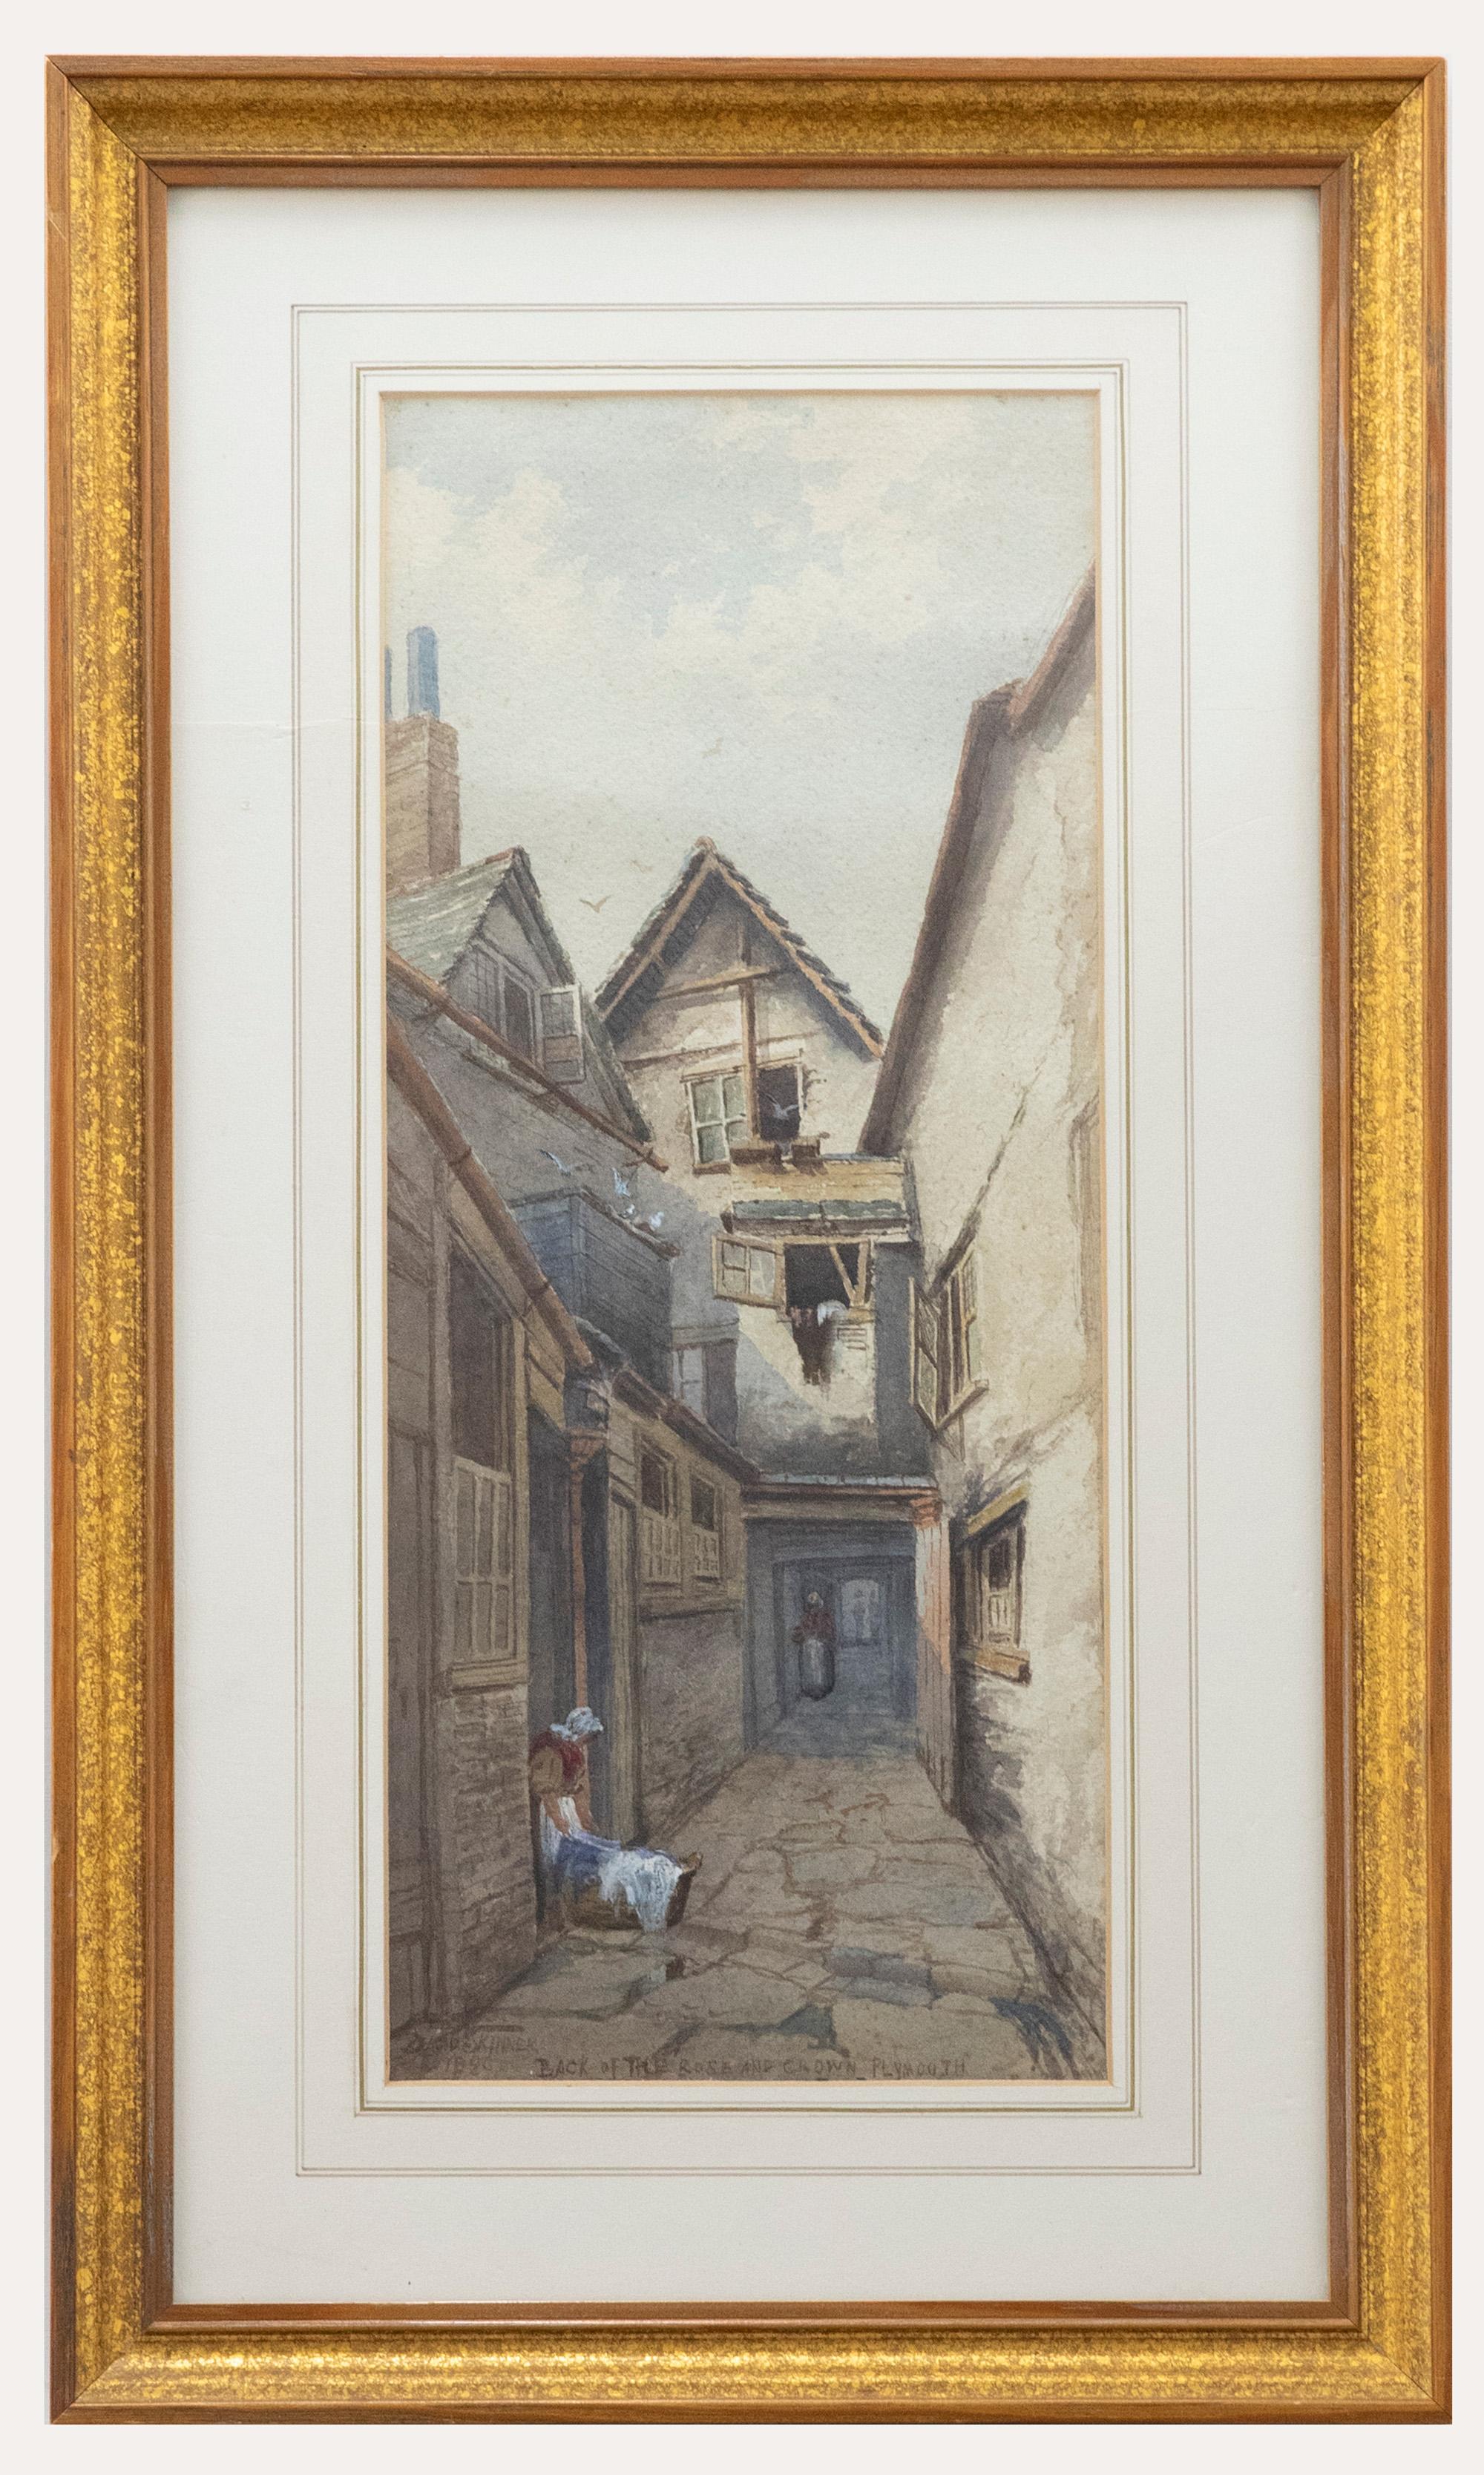 Unknown Landscape Art - David Skinner - Framed 1896 Watercolour, Back of the Rose & Crown, Plymouth